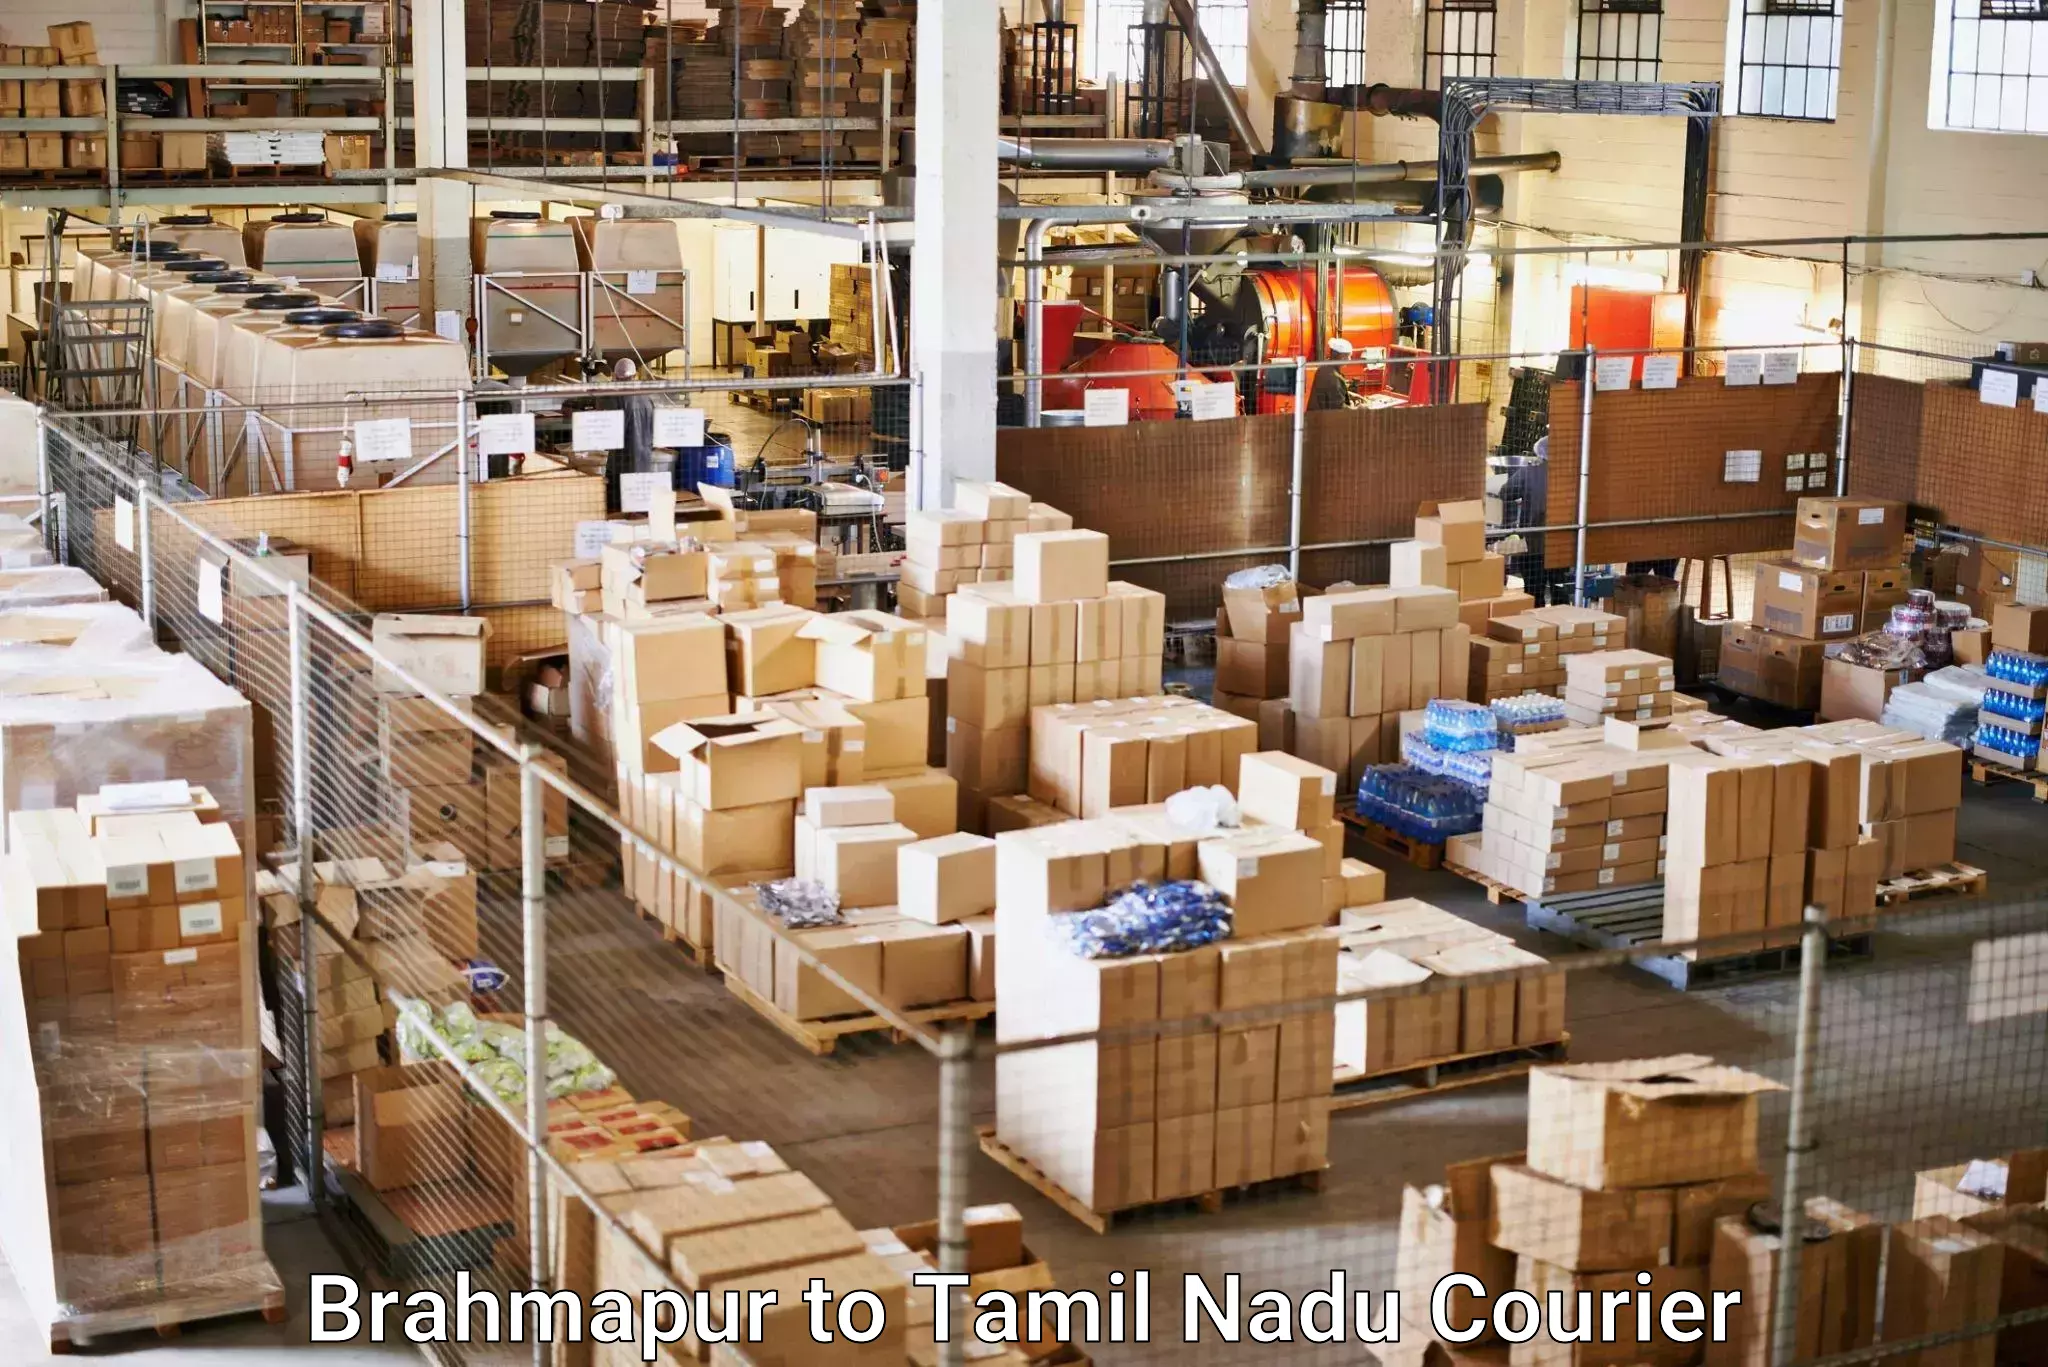 State-of-the-art courier technology Brahmapur to Tamil Nadu